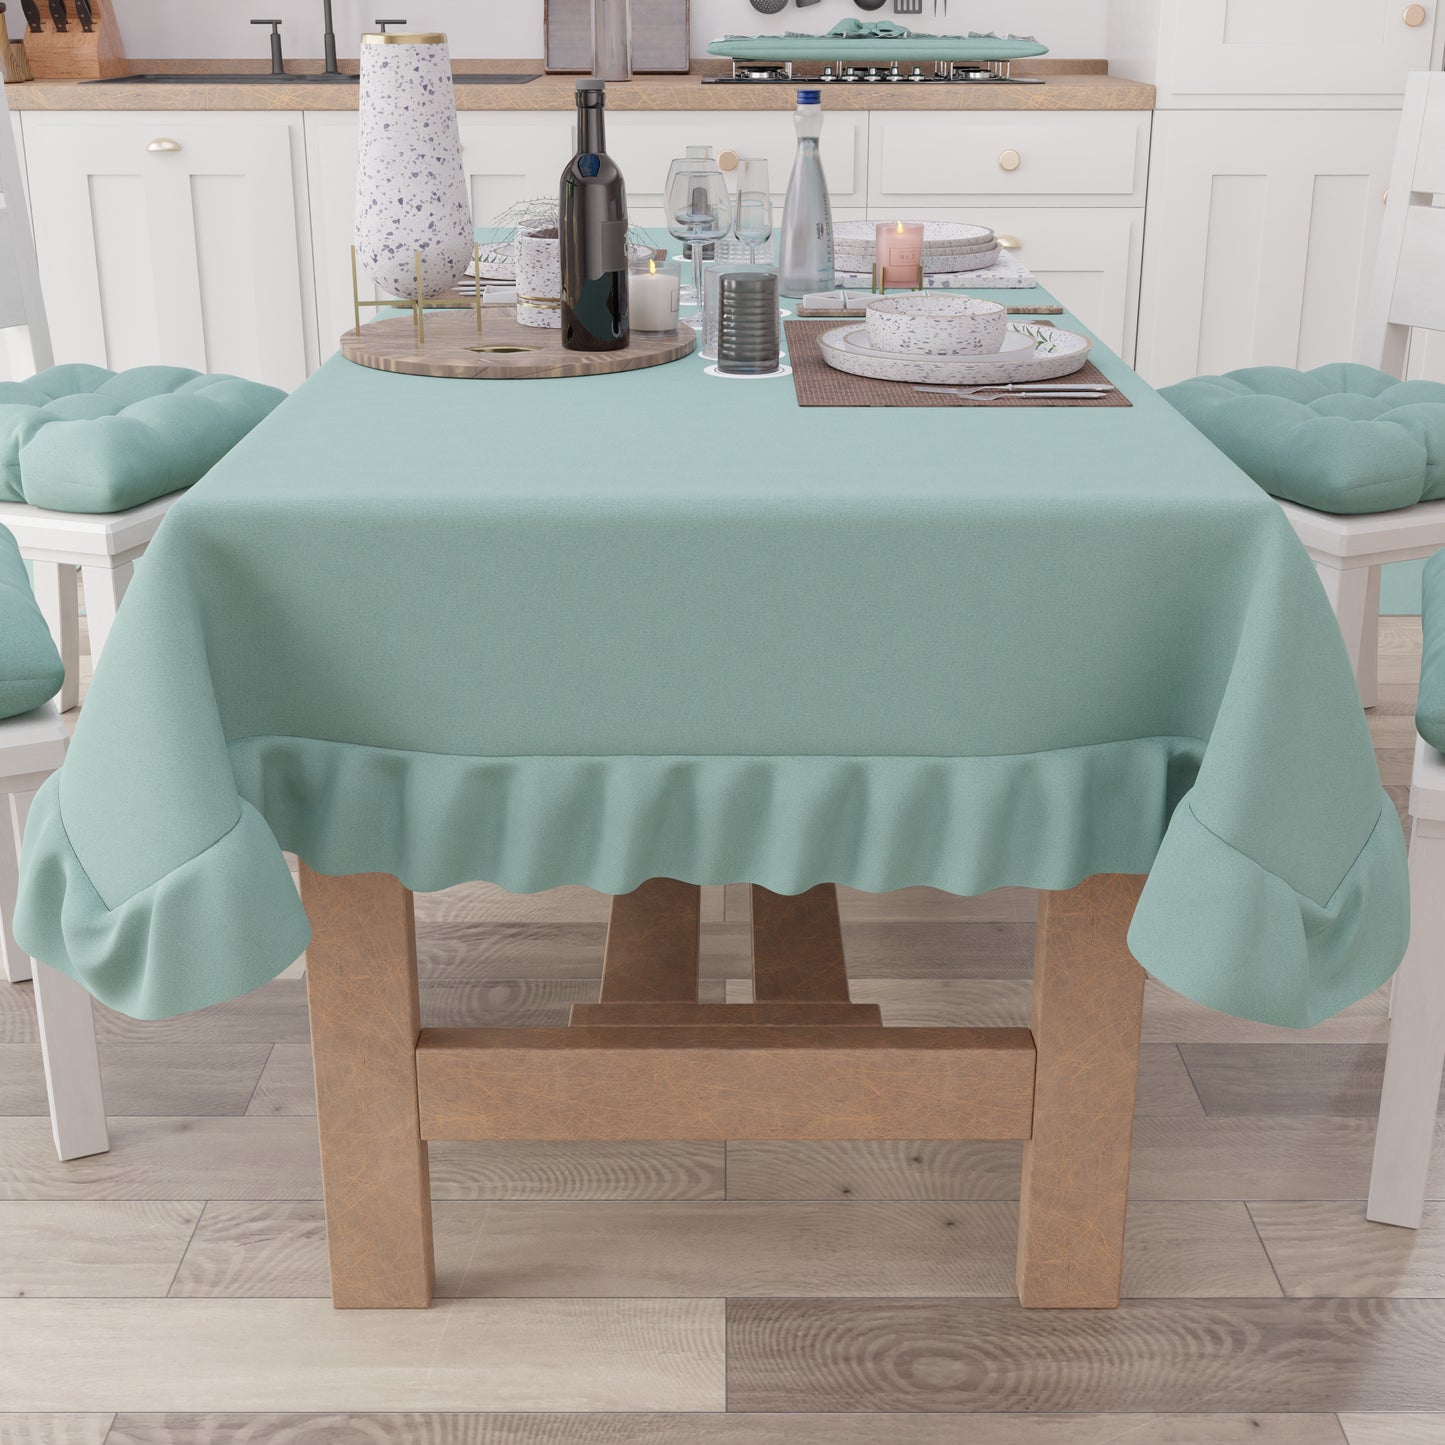 Tablecloth, Tablecloth with Ruffles, Table Cover with Ruffles, Aqua Green 